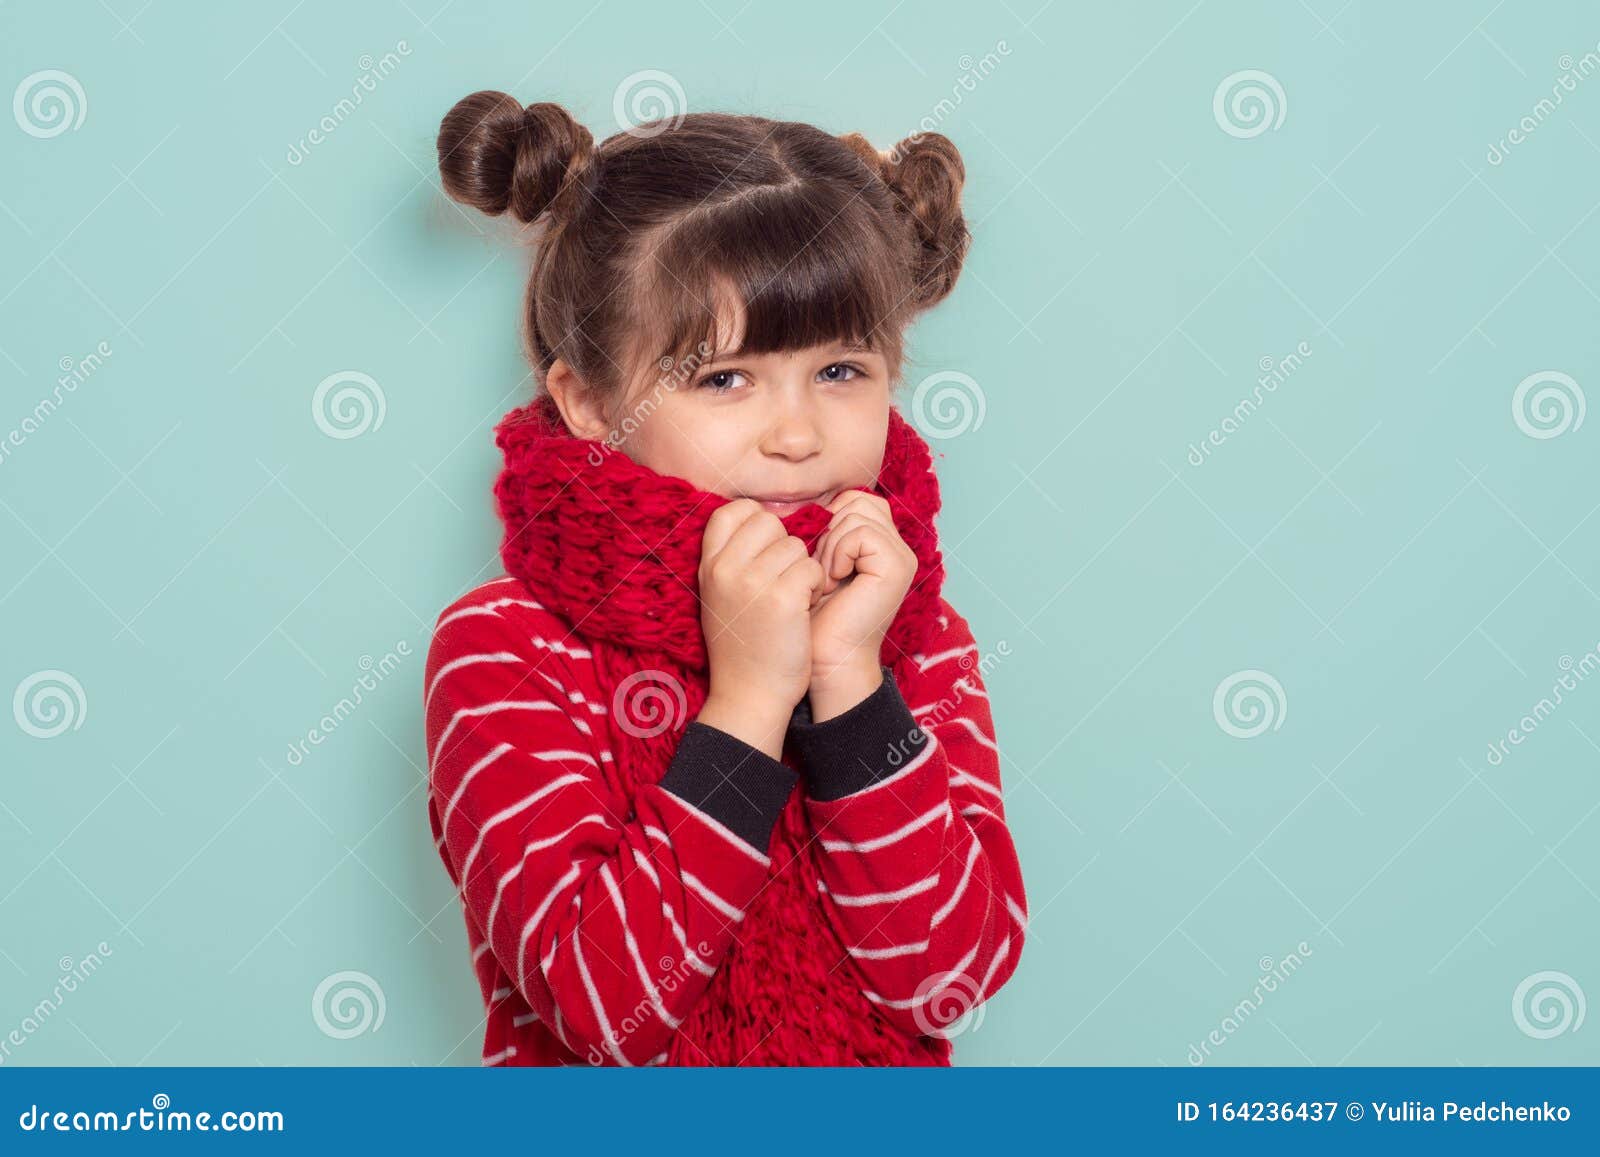 Child Portrait of a 6 Year Old Brunette, Blue Eyes, Funny Hairstyle Wearing  a Red Scarf and Sweater, Stock Image - Image of blue, clothing: 164236437